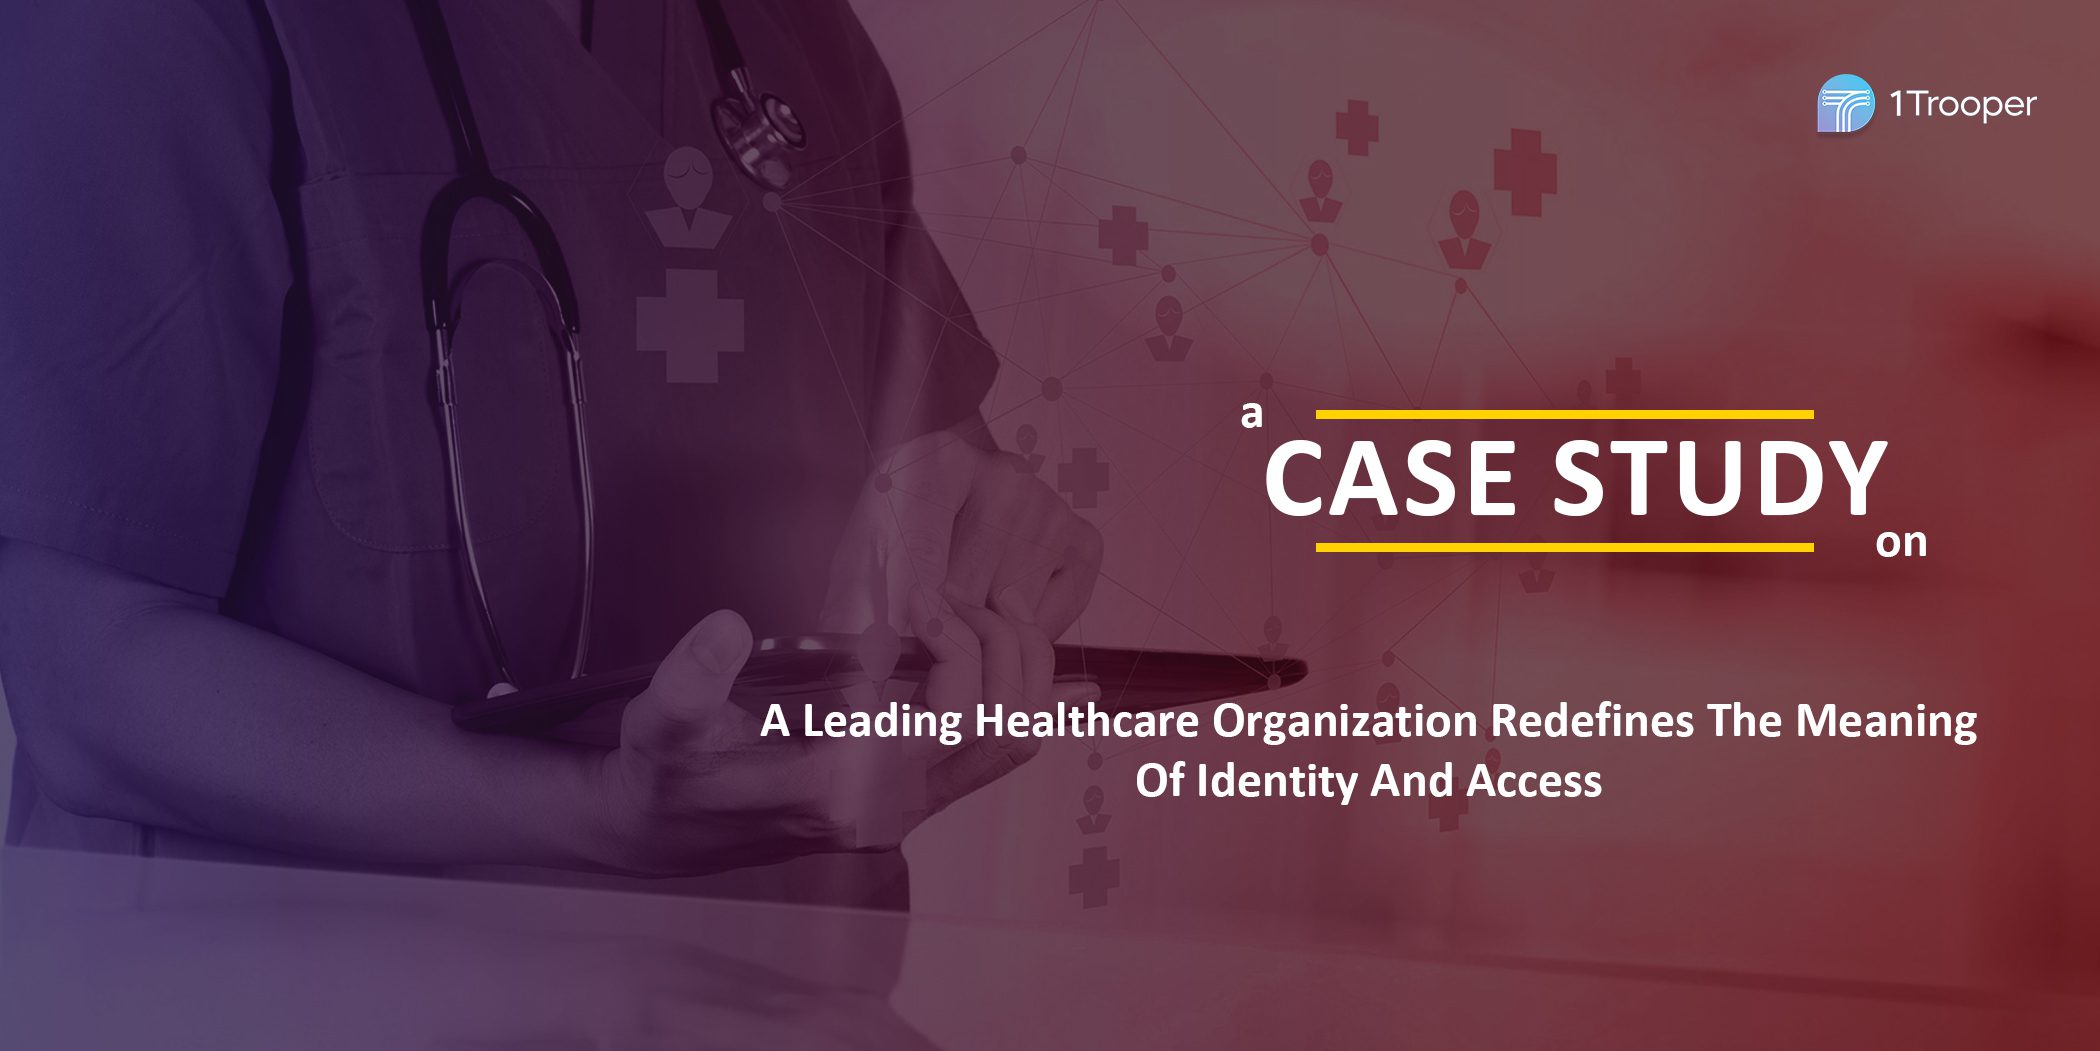 A Leading Healthcare Organization Redefines the Meaning of Identity and Access